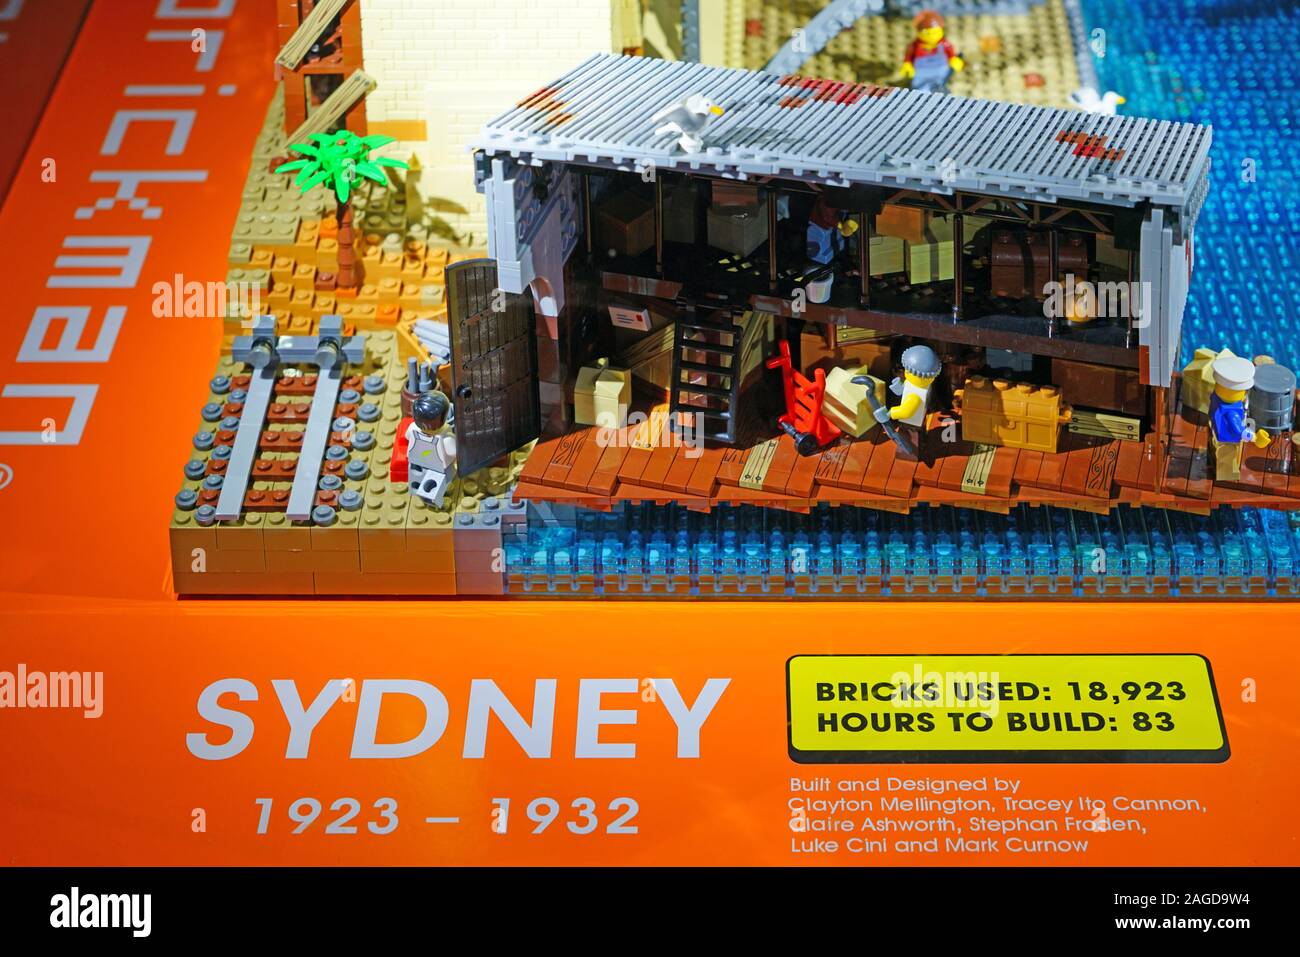 MELBOURNE, AUSTRALIA -16 JUL 2019- View of a model of Sydney, Australia, in LEGO at the Brickman Cities interactive exhibit at the Scienceworks Stock Photo - Alamy